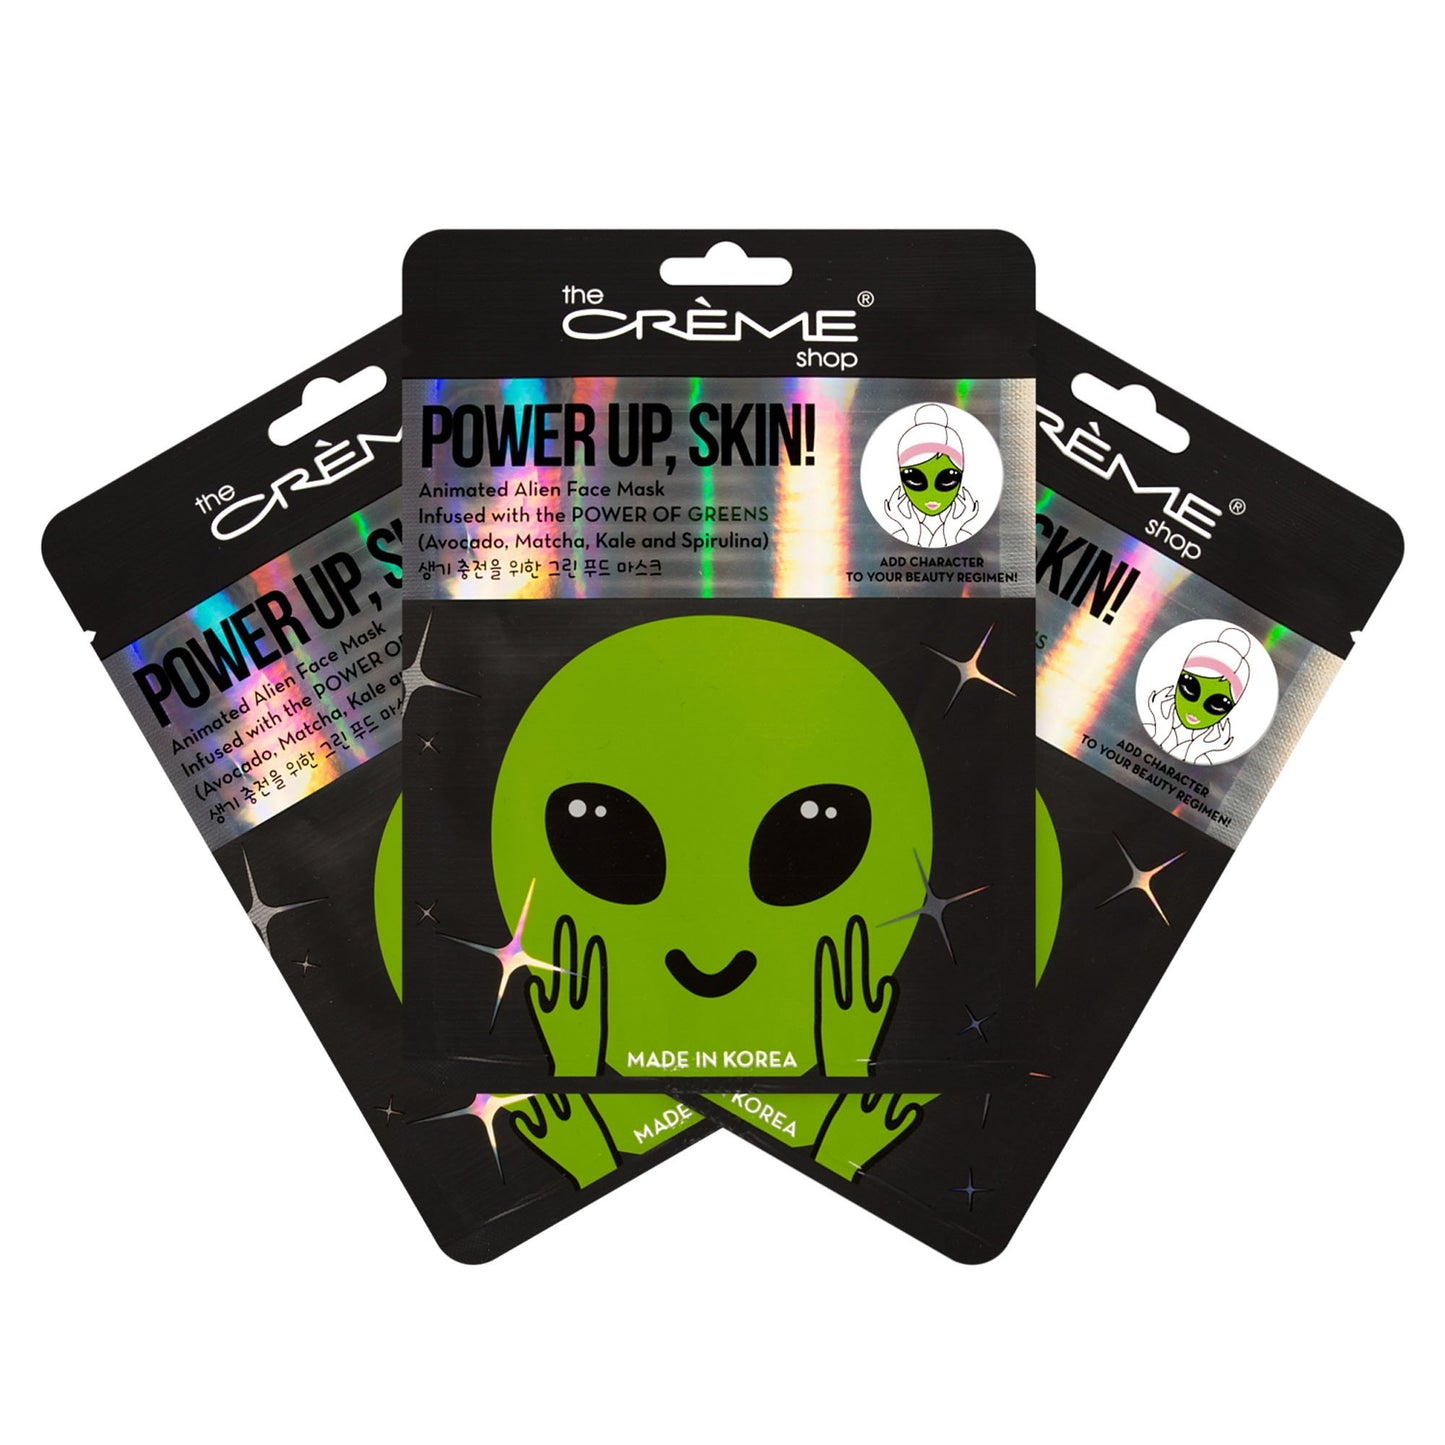 Power Up, Skin! Animated Alien Face Mask - Power of Greens - The Crème Shop